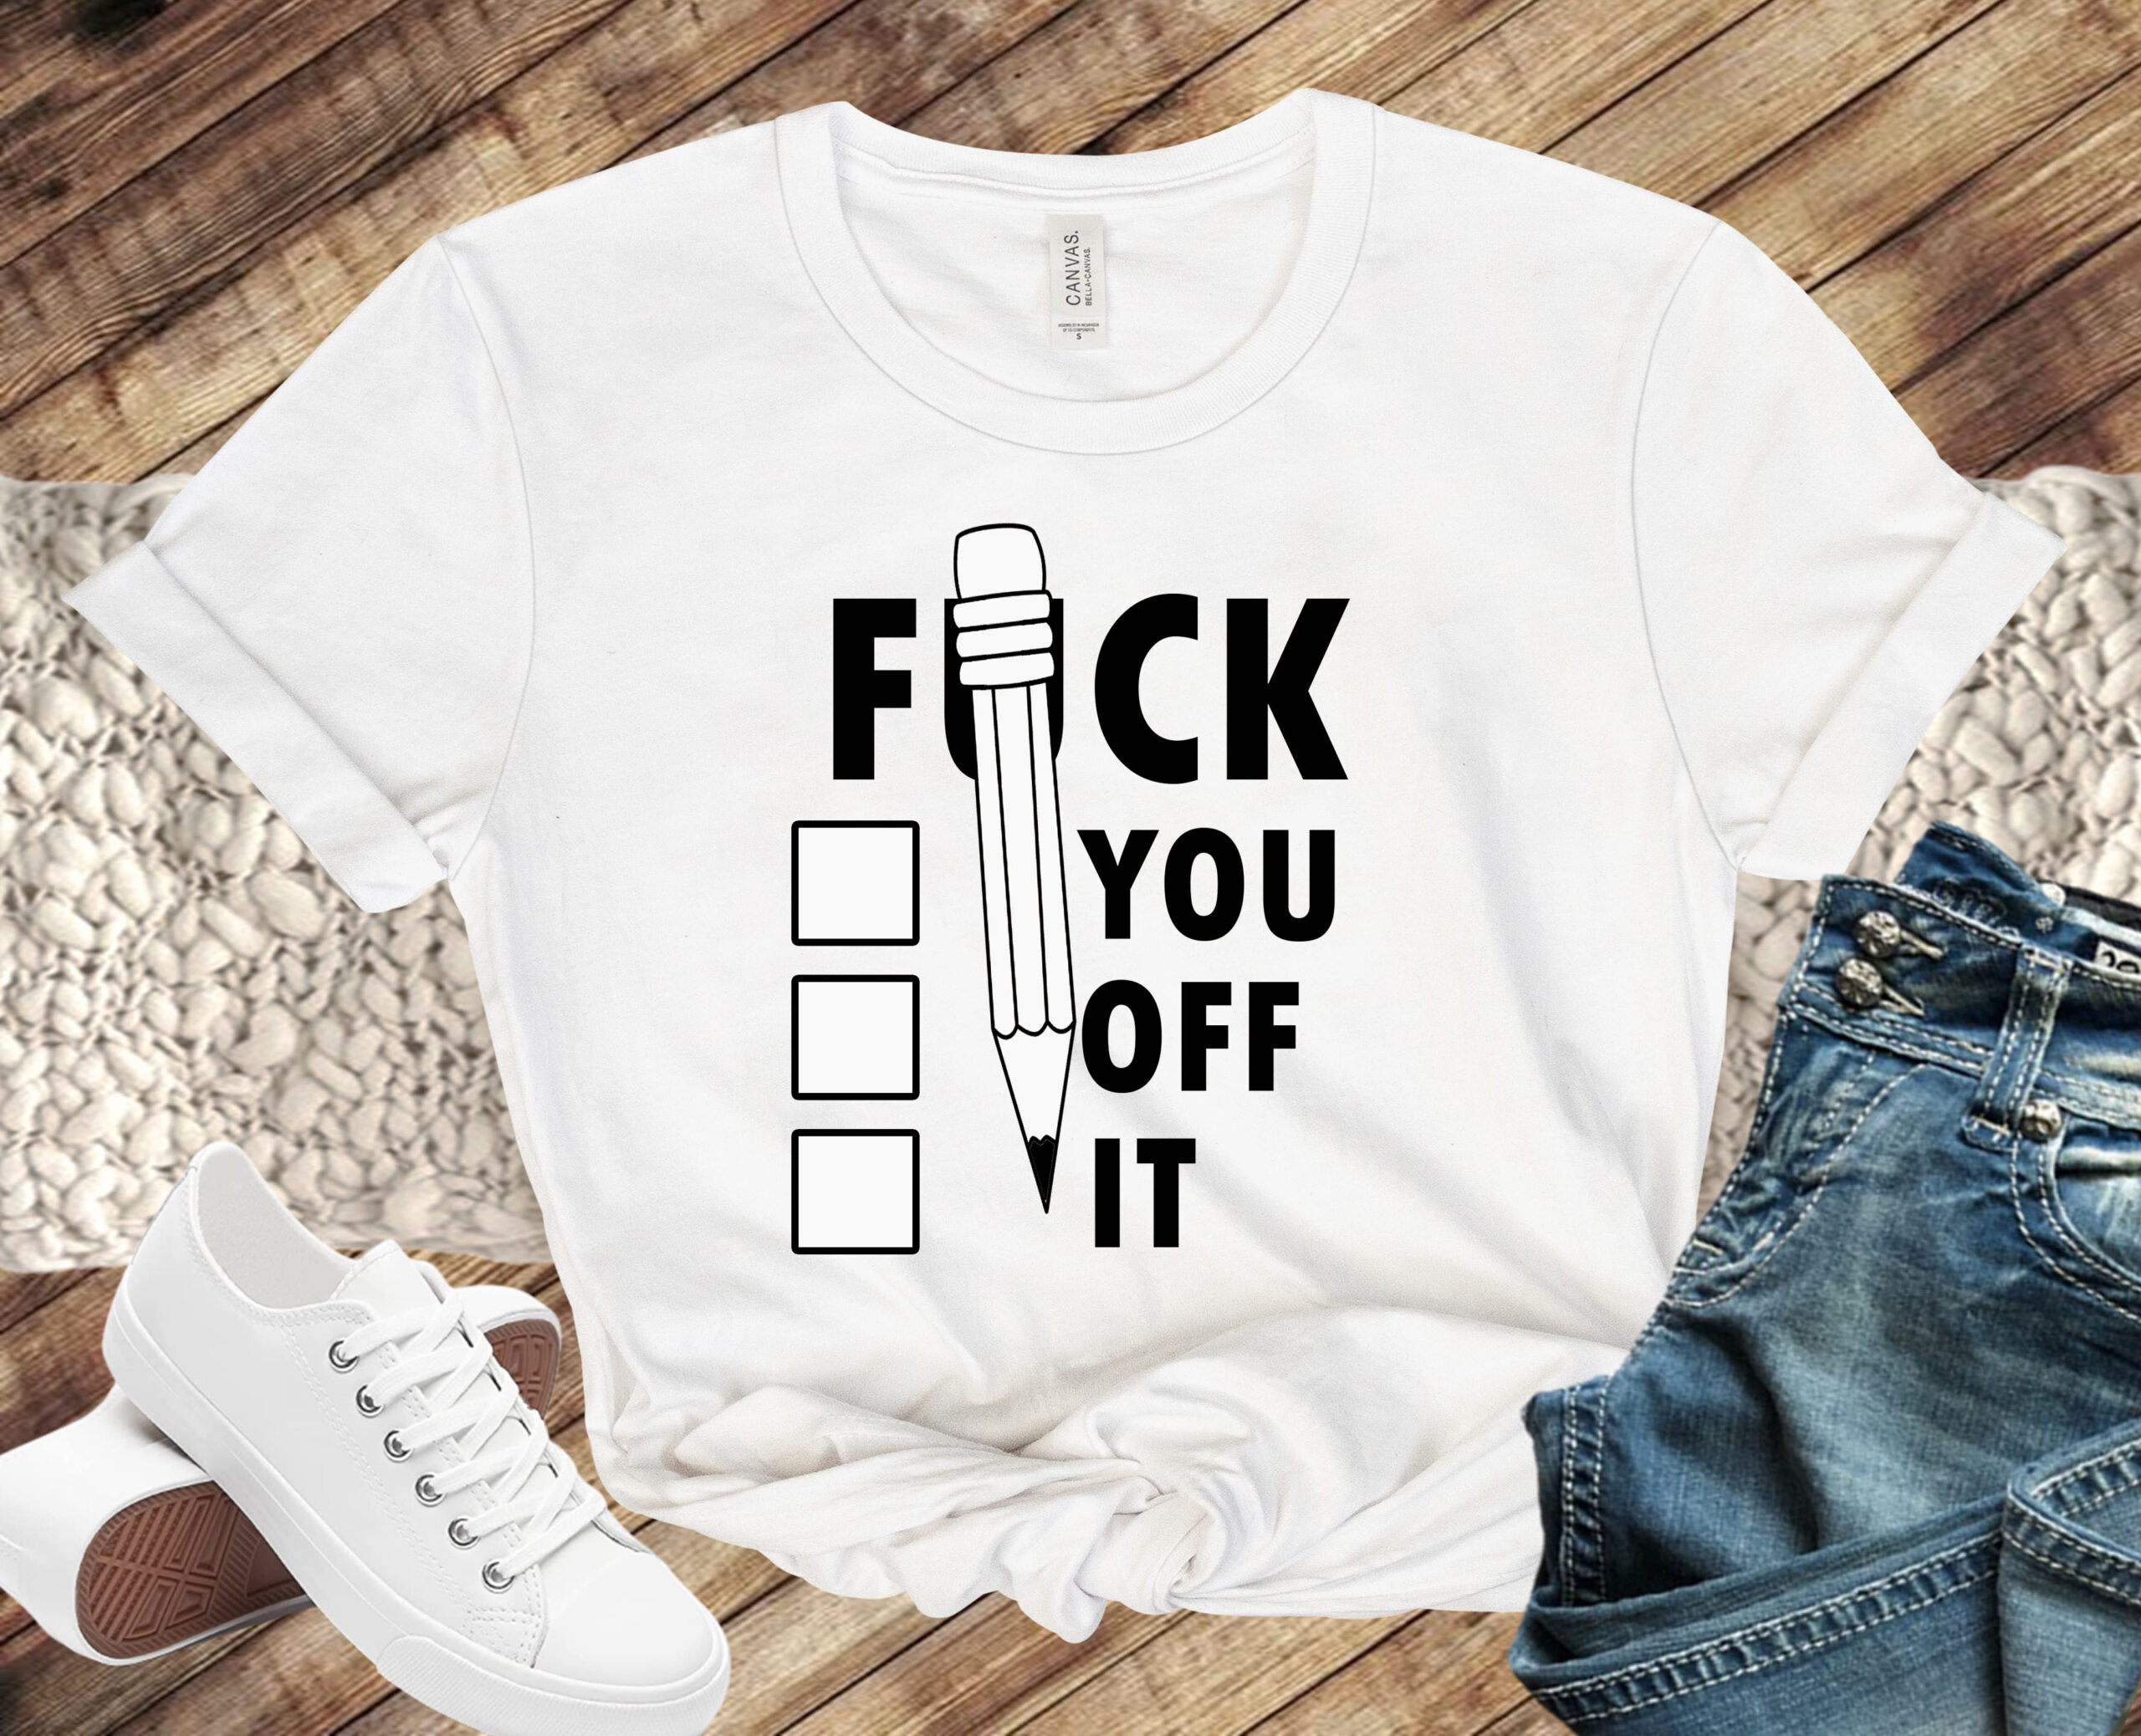 Free F*CK YOU OFF IT SVG File